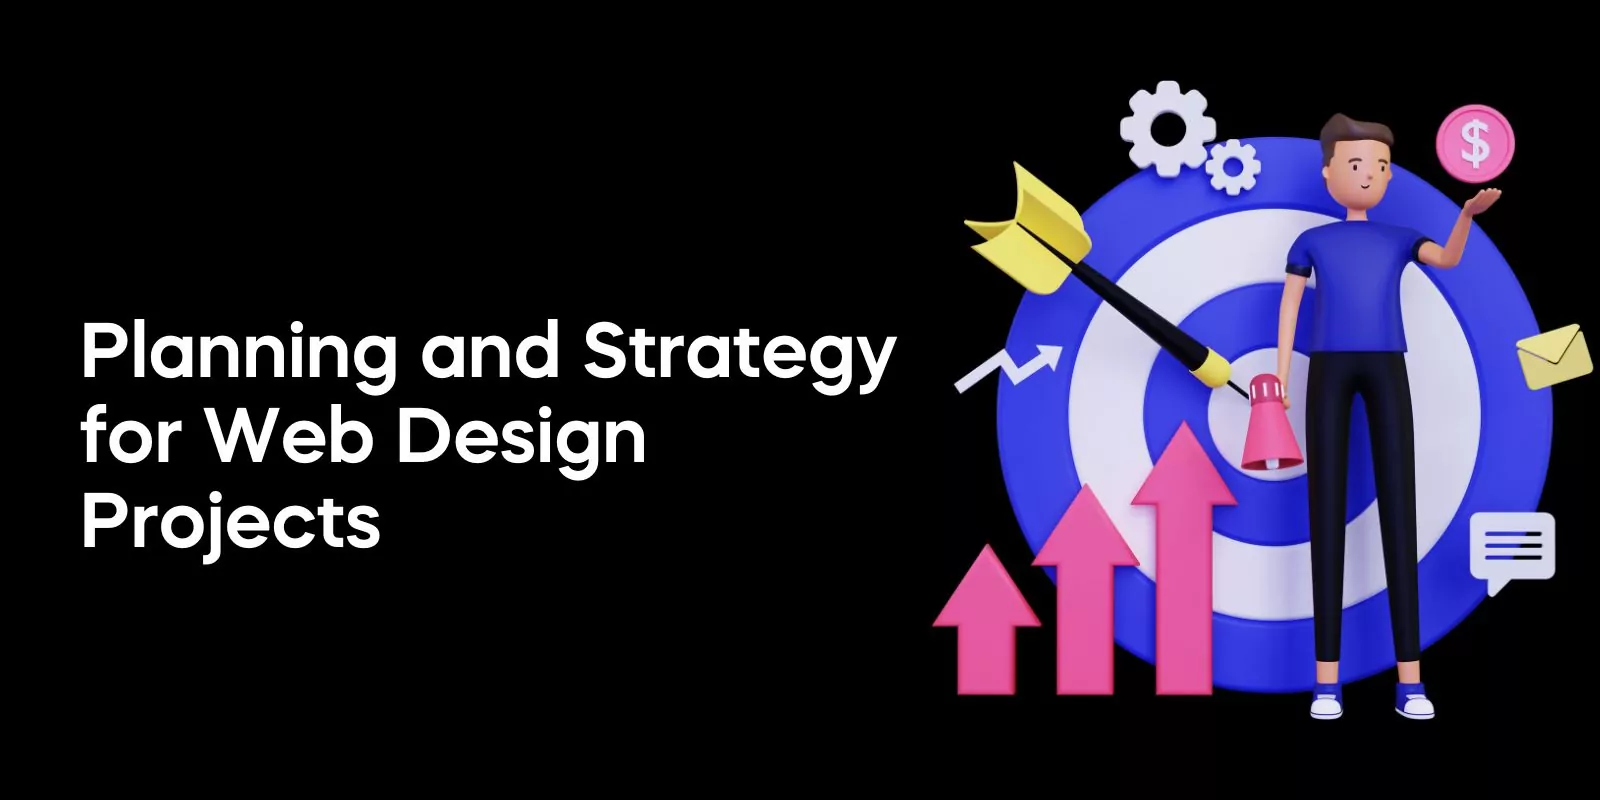 Planning and Strategy for Web Design Projects